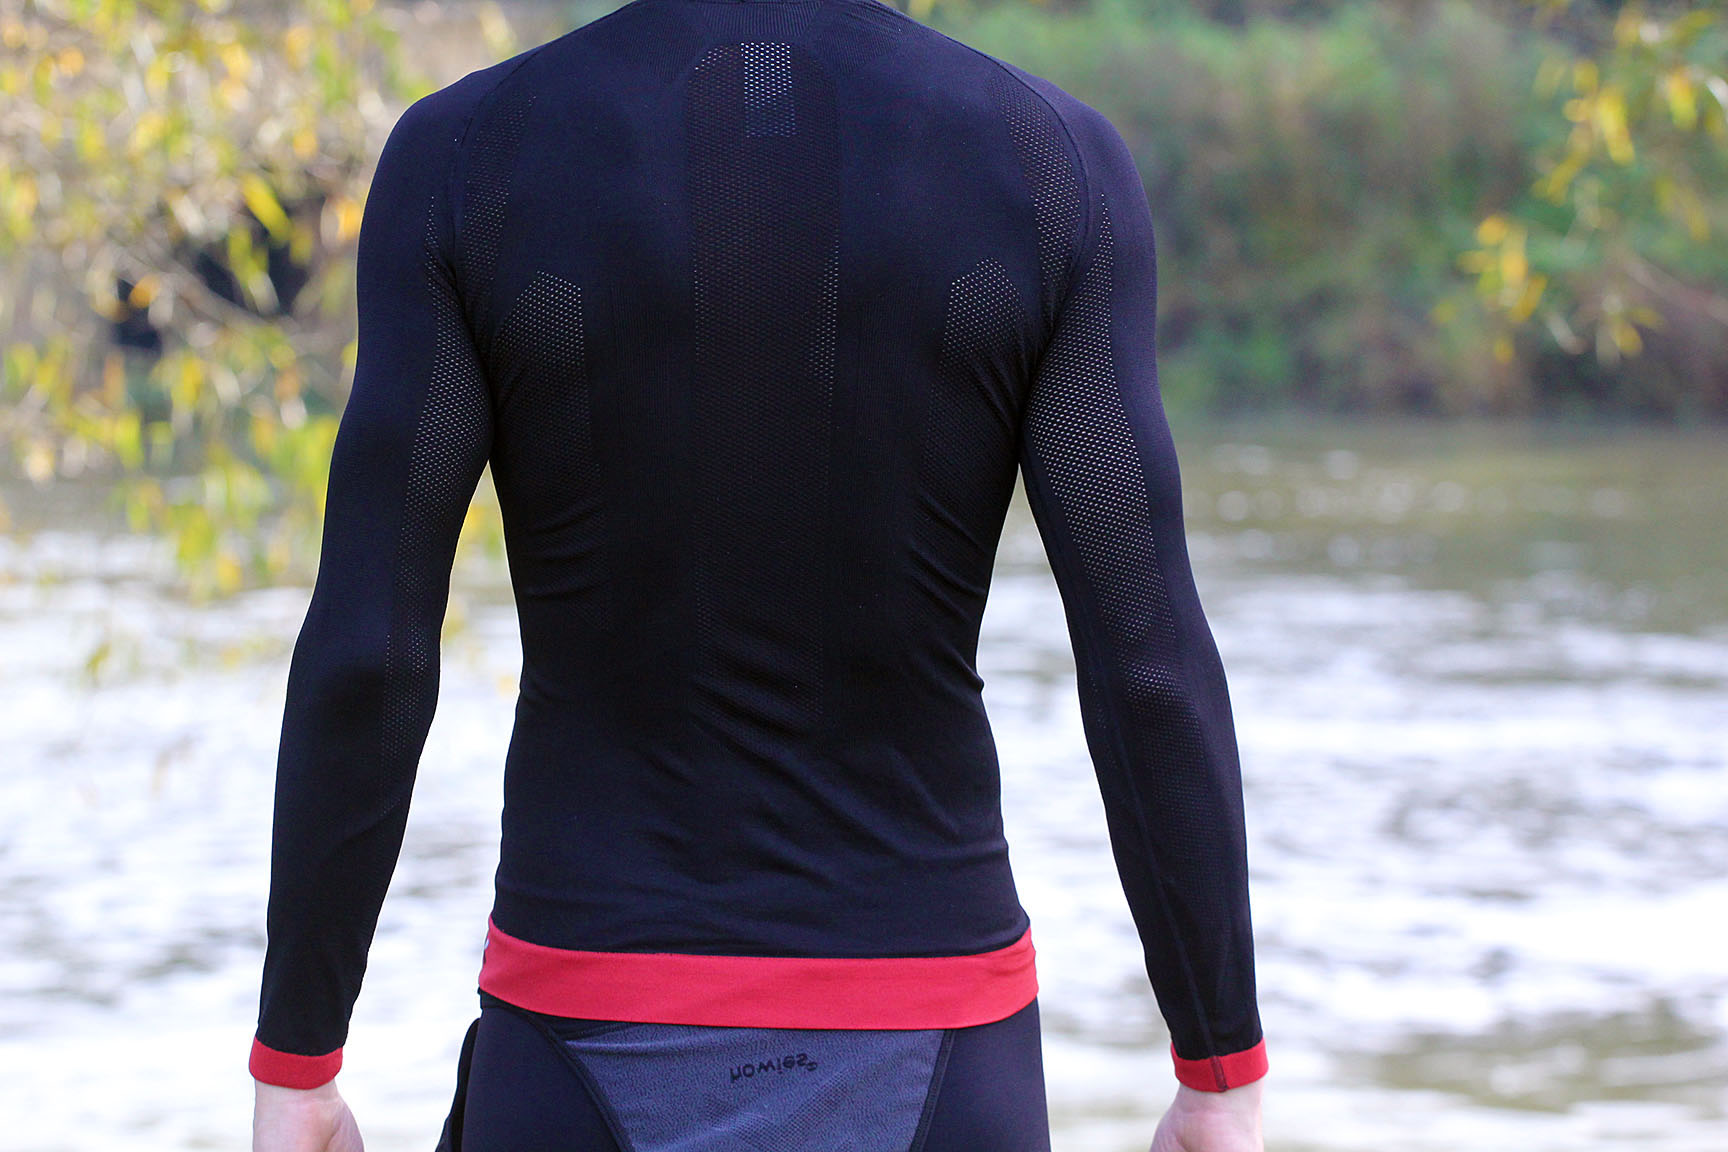 15 Of The Best Cycling Base Layers Undershirts For All Seasons inside cycling base layer with regard to The house